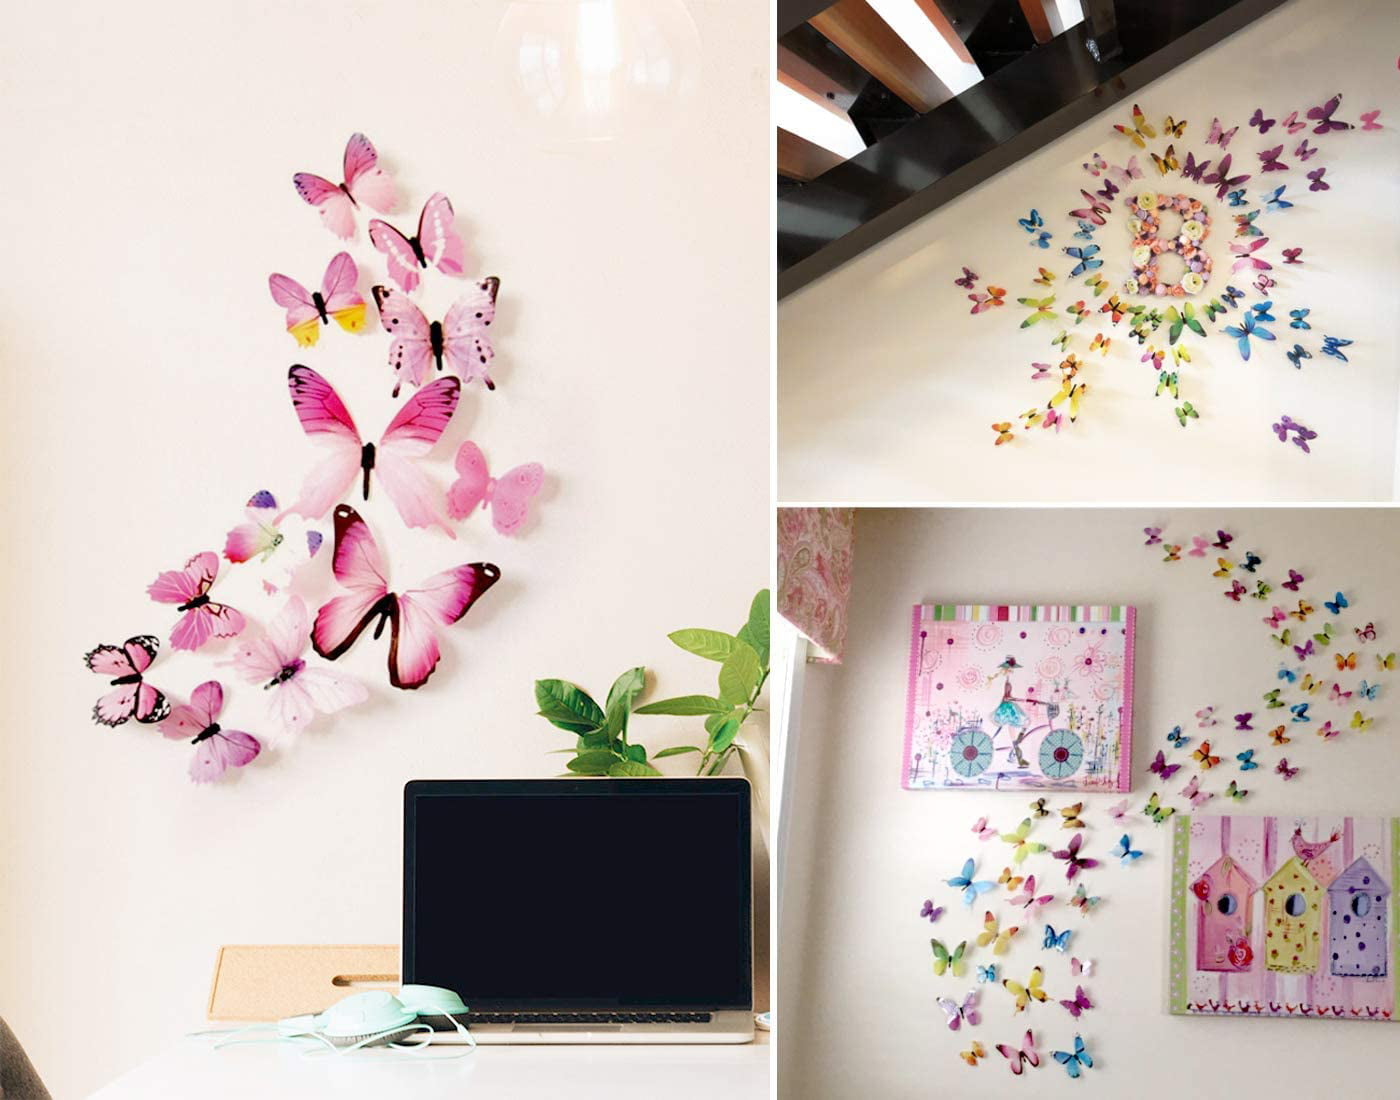 12 Pcs 3D Butterfly Wall Stickers Decor Art Decorations,Butterfly Wall Decals Removable DIY Home Decorations Art Decor Wall Stickers for Wall Decor